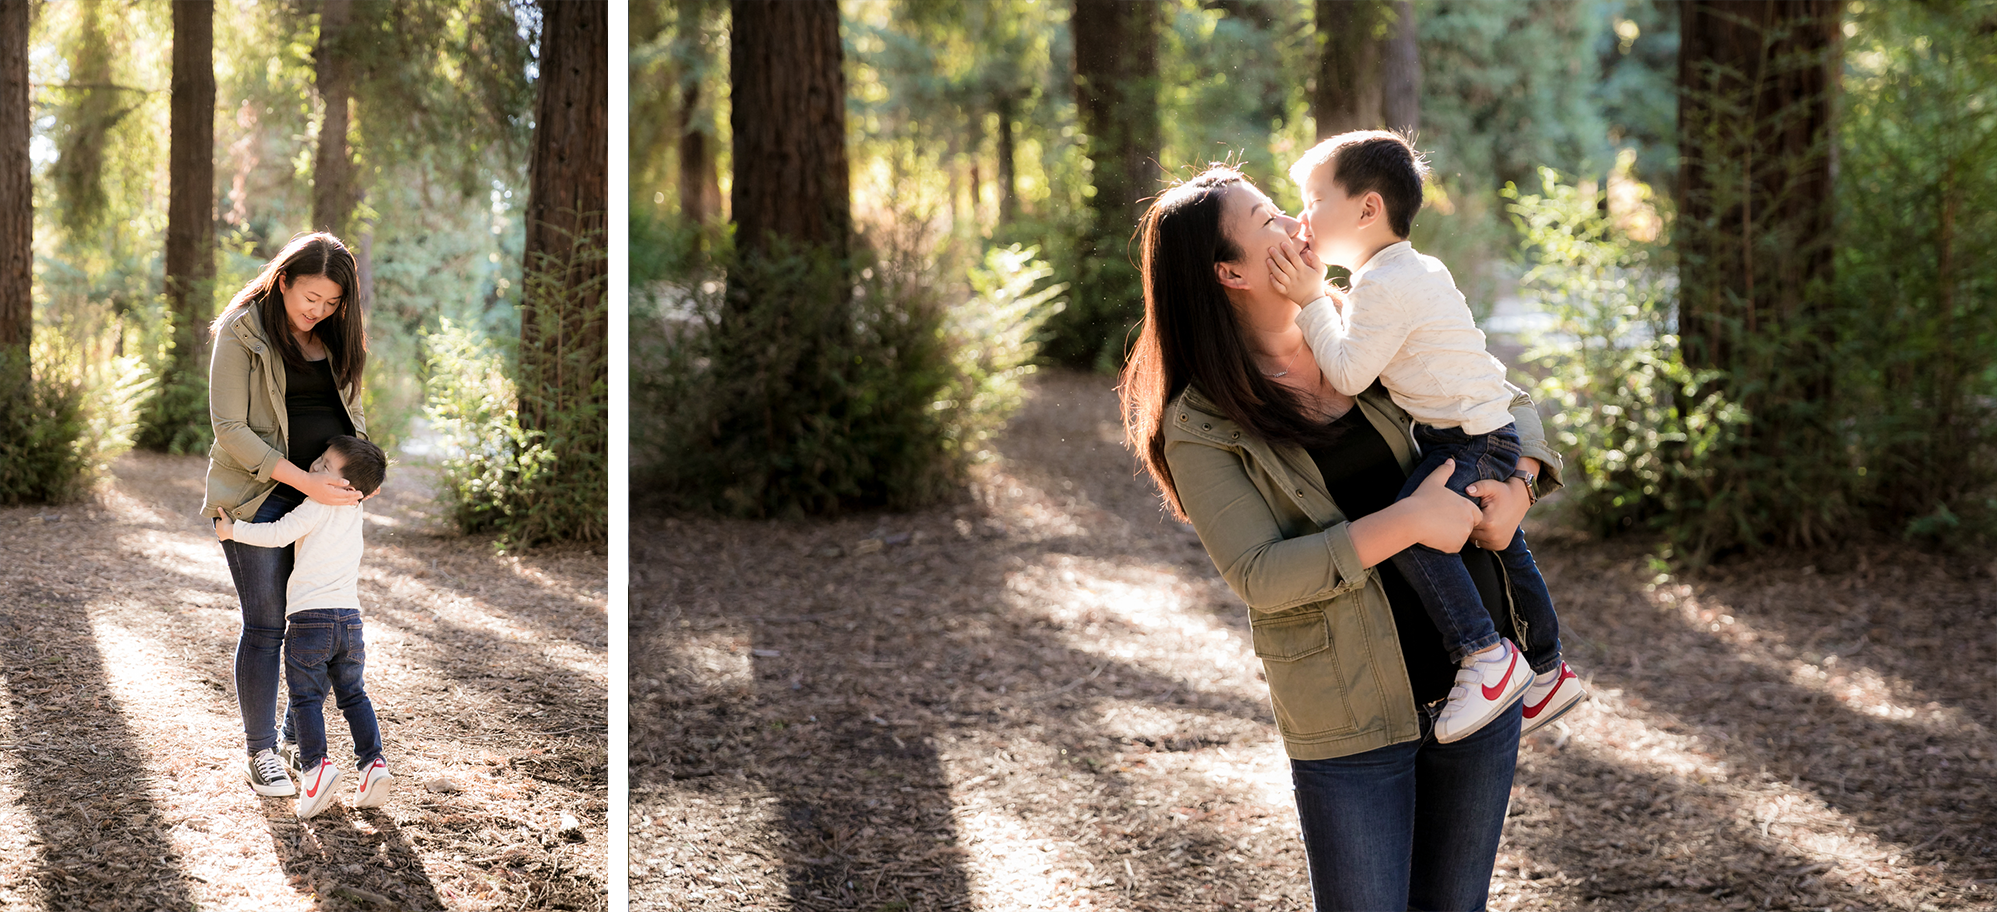 8-Yin-Family-Session-Carbon-Canyon-Regional-Park-Brea-Photos-Andrew-Kwak-Photography.png